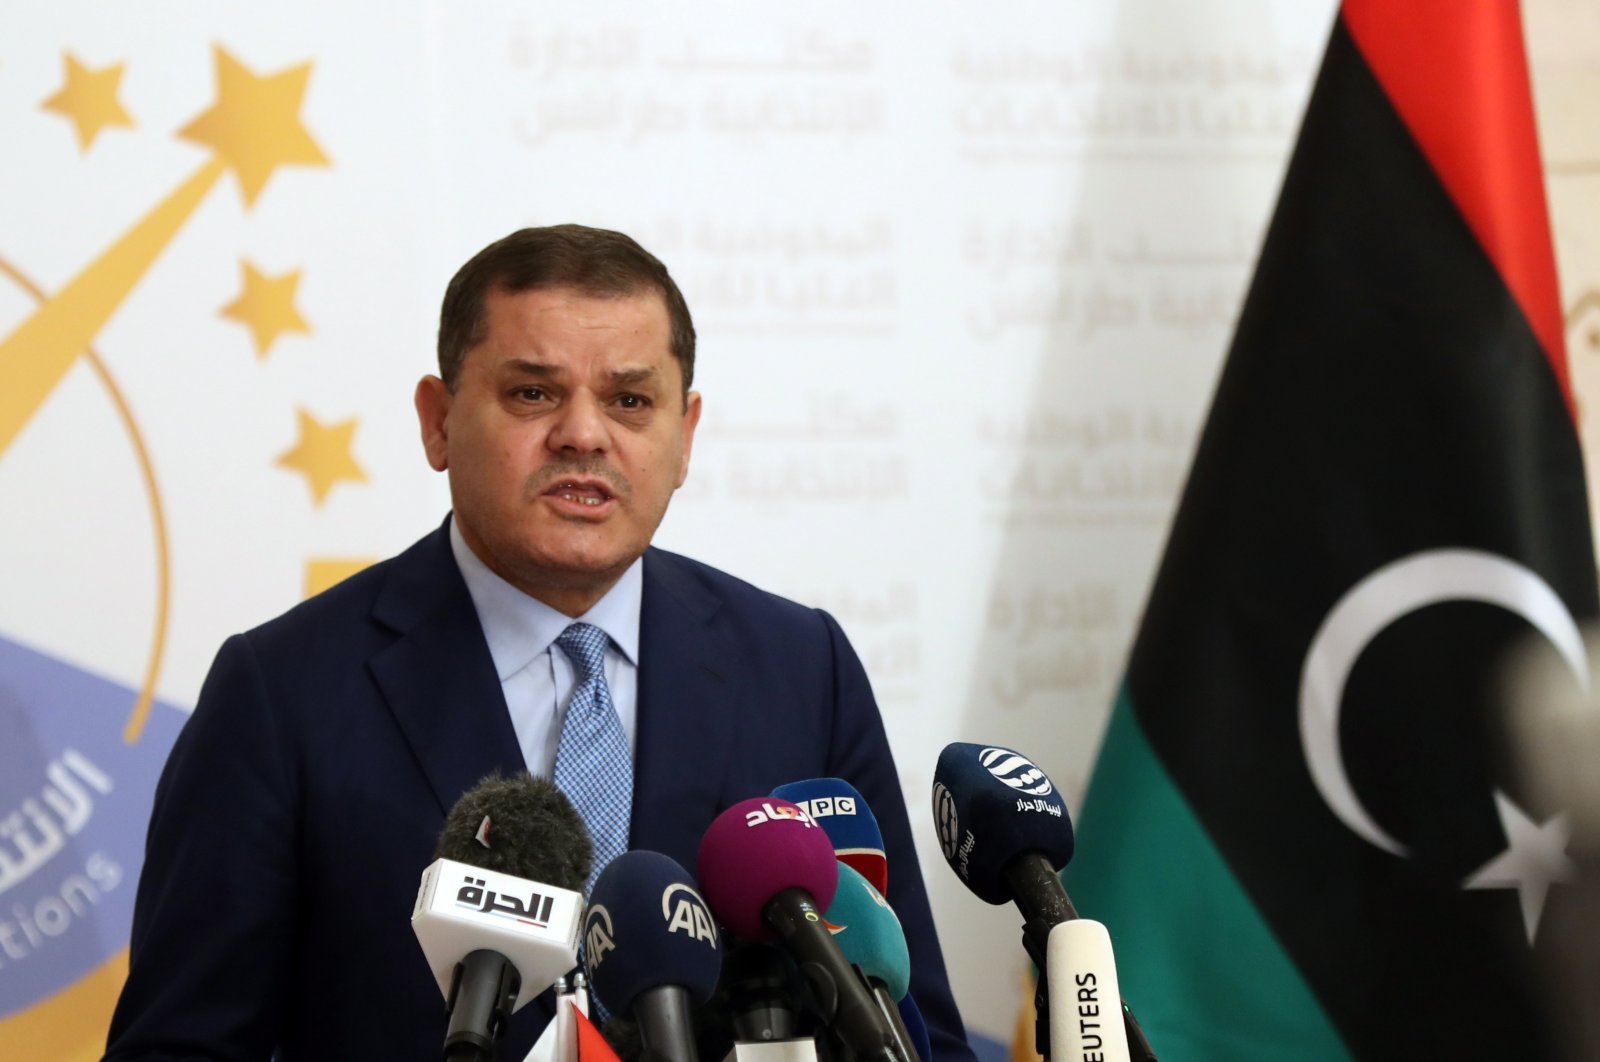 Libyan Prime Minister Abdul Hamid Dbeibah speaks after submitting his candidacy papers for the upcoming presidential election at the headquarters of the electoral commission in Tripoli, Libya, Nov. 21, 2021. (EPA Photo)